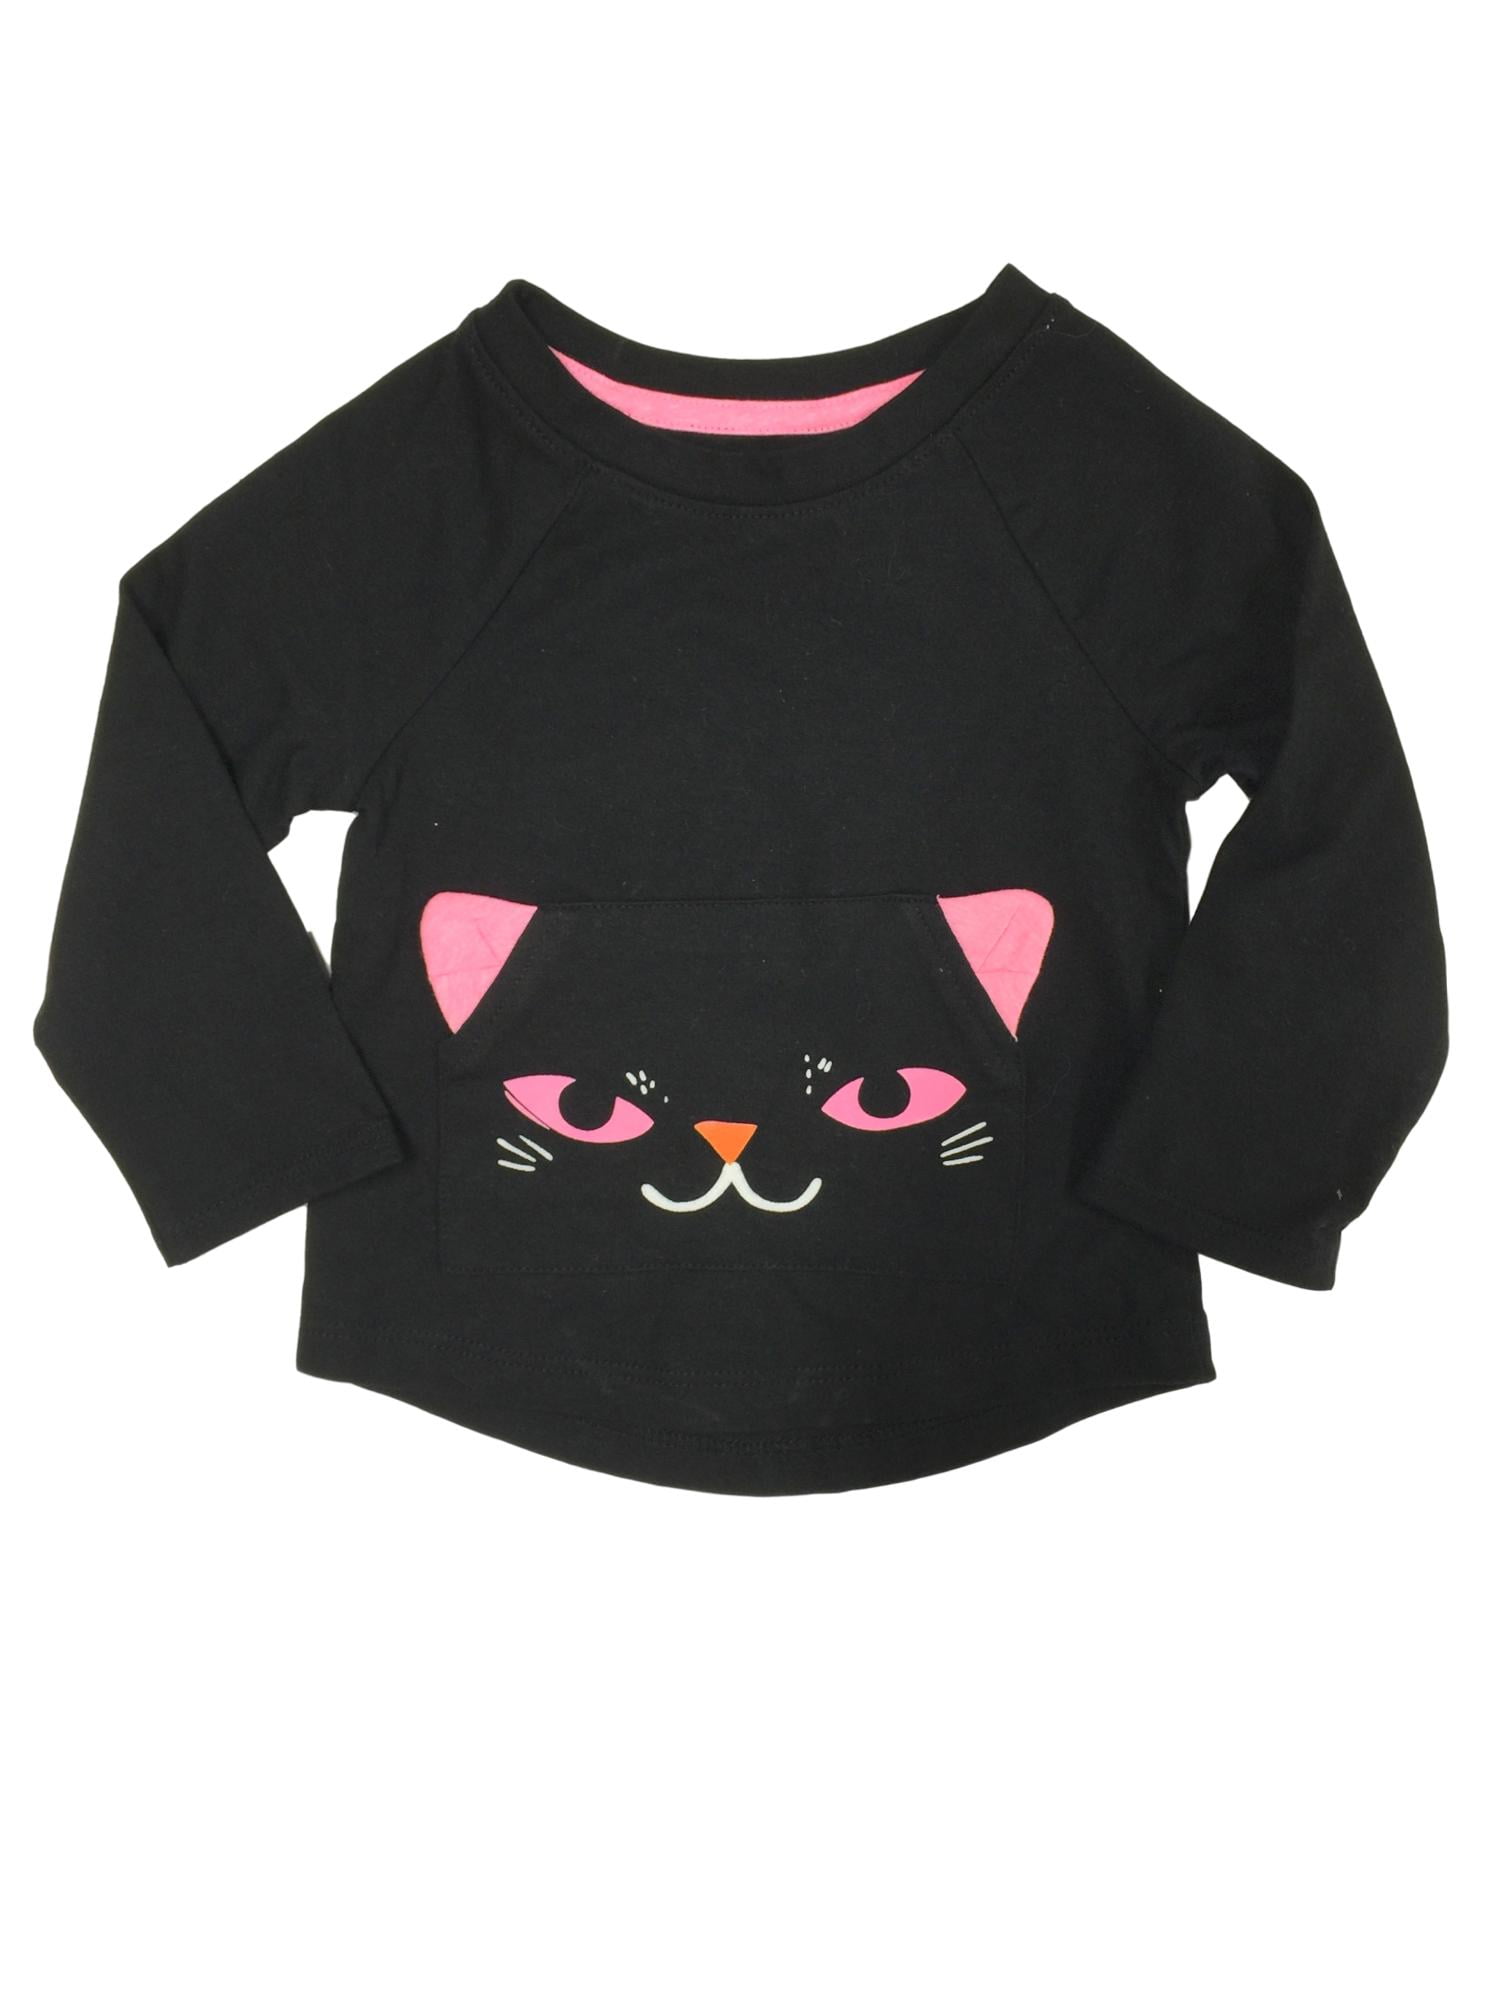 Baby's Long Sleeved Halloween T shirt with Monster Eyes Clothing Unisex Kids Clothing Unisex Baby Clothing Tops 